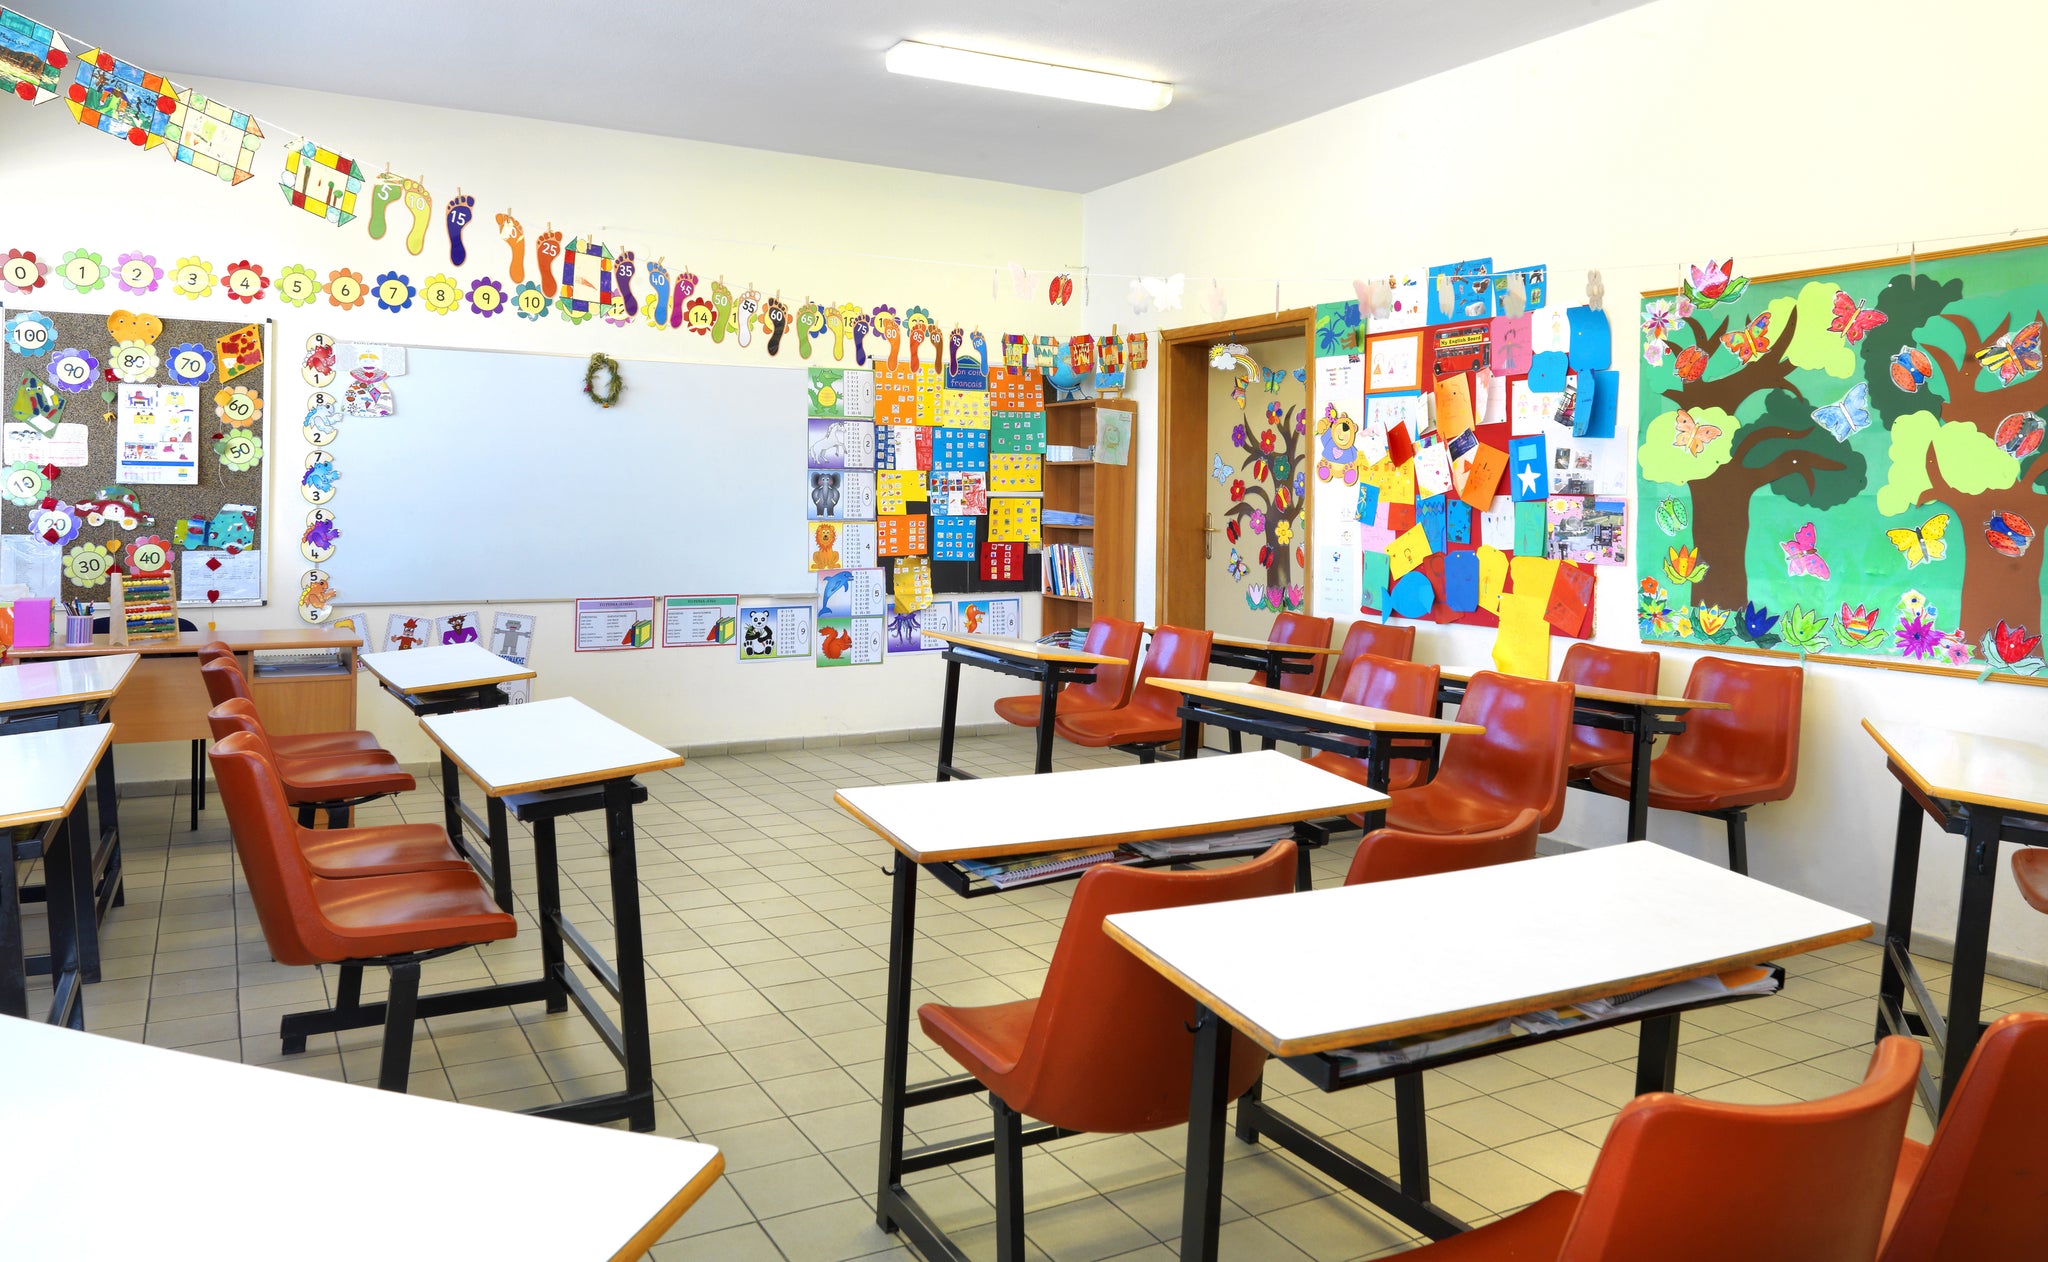 How Ventilation Impacts Classroom Attendence